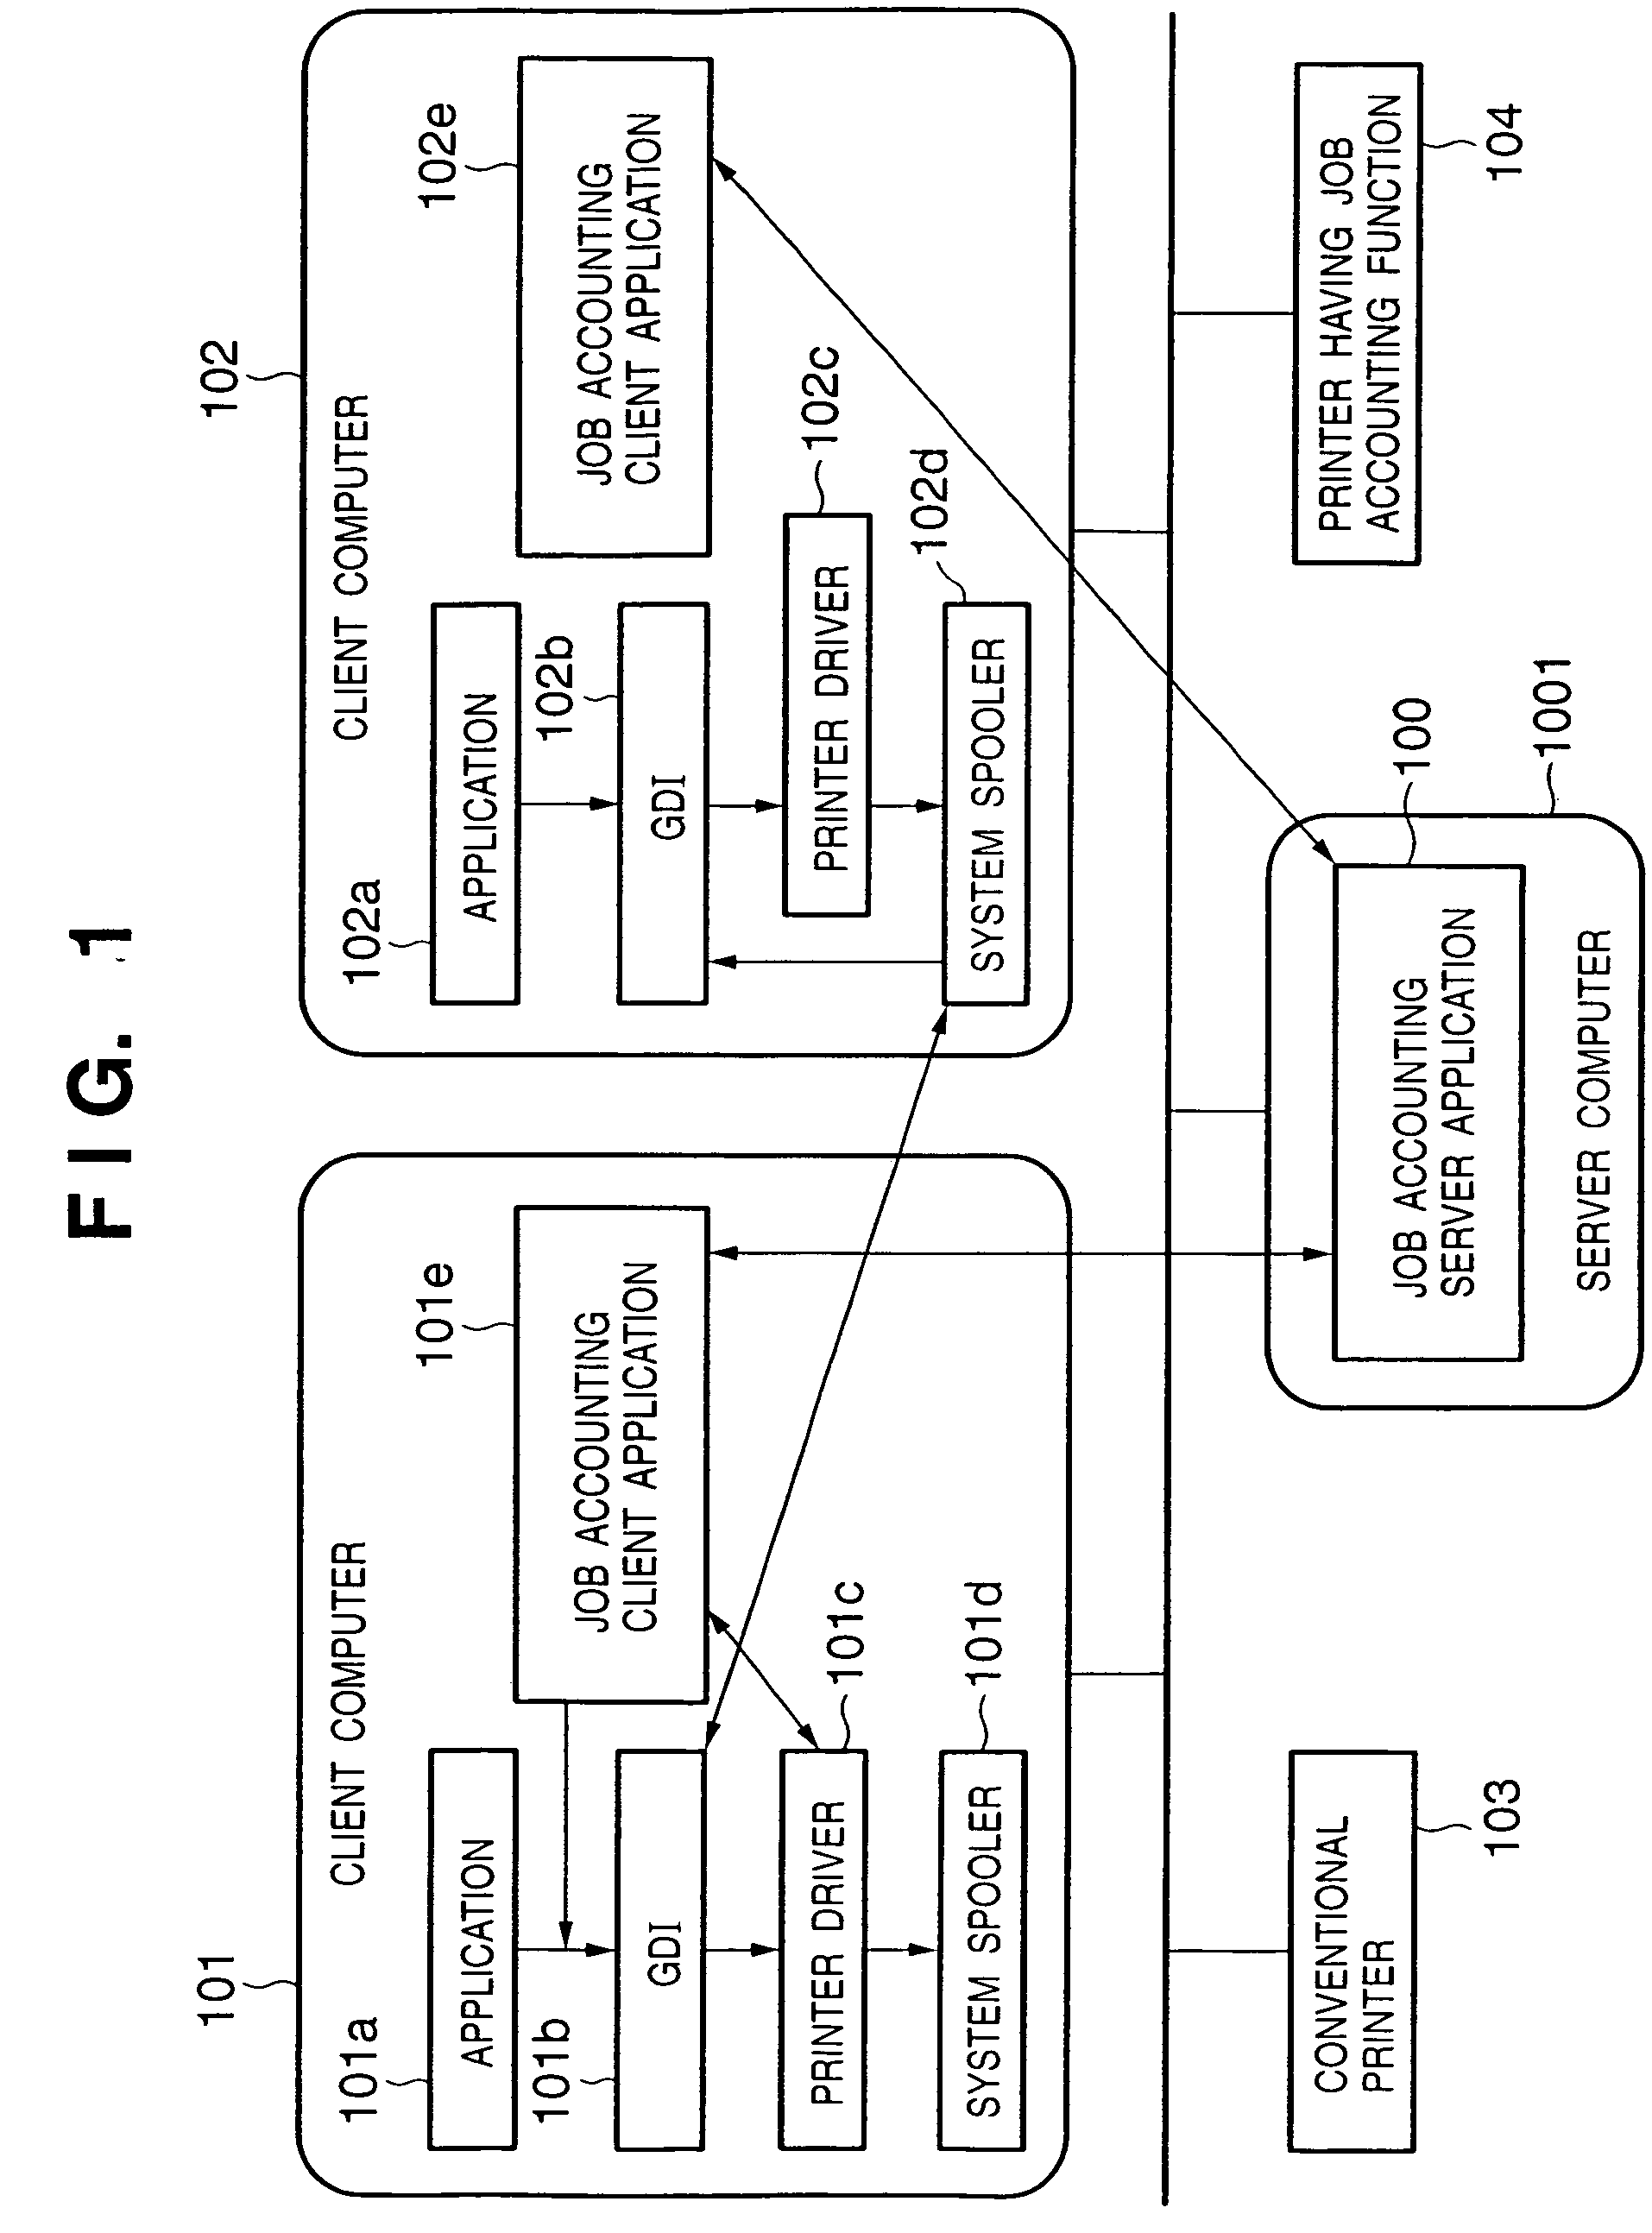 Print control apparatus and method, and print system